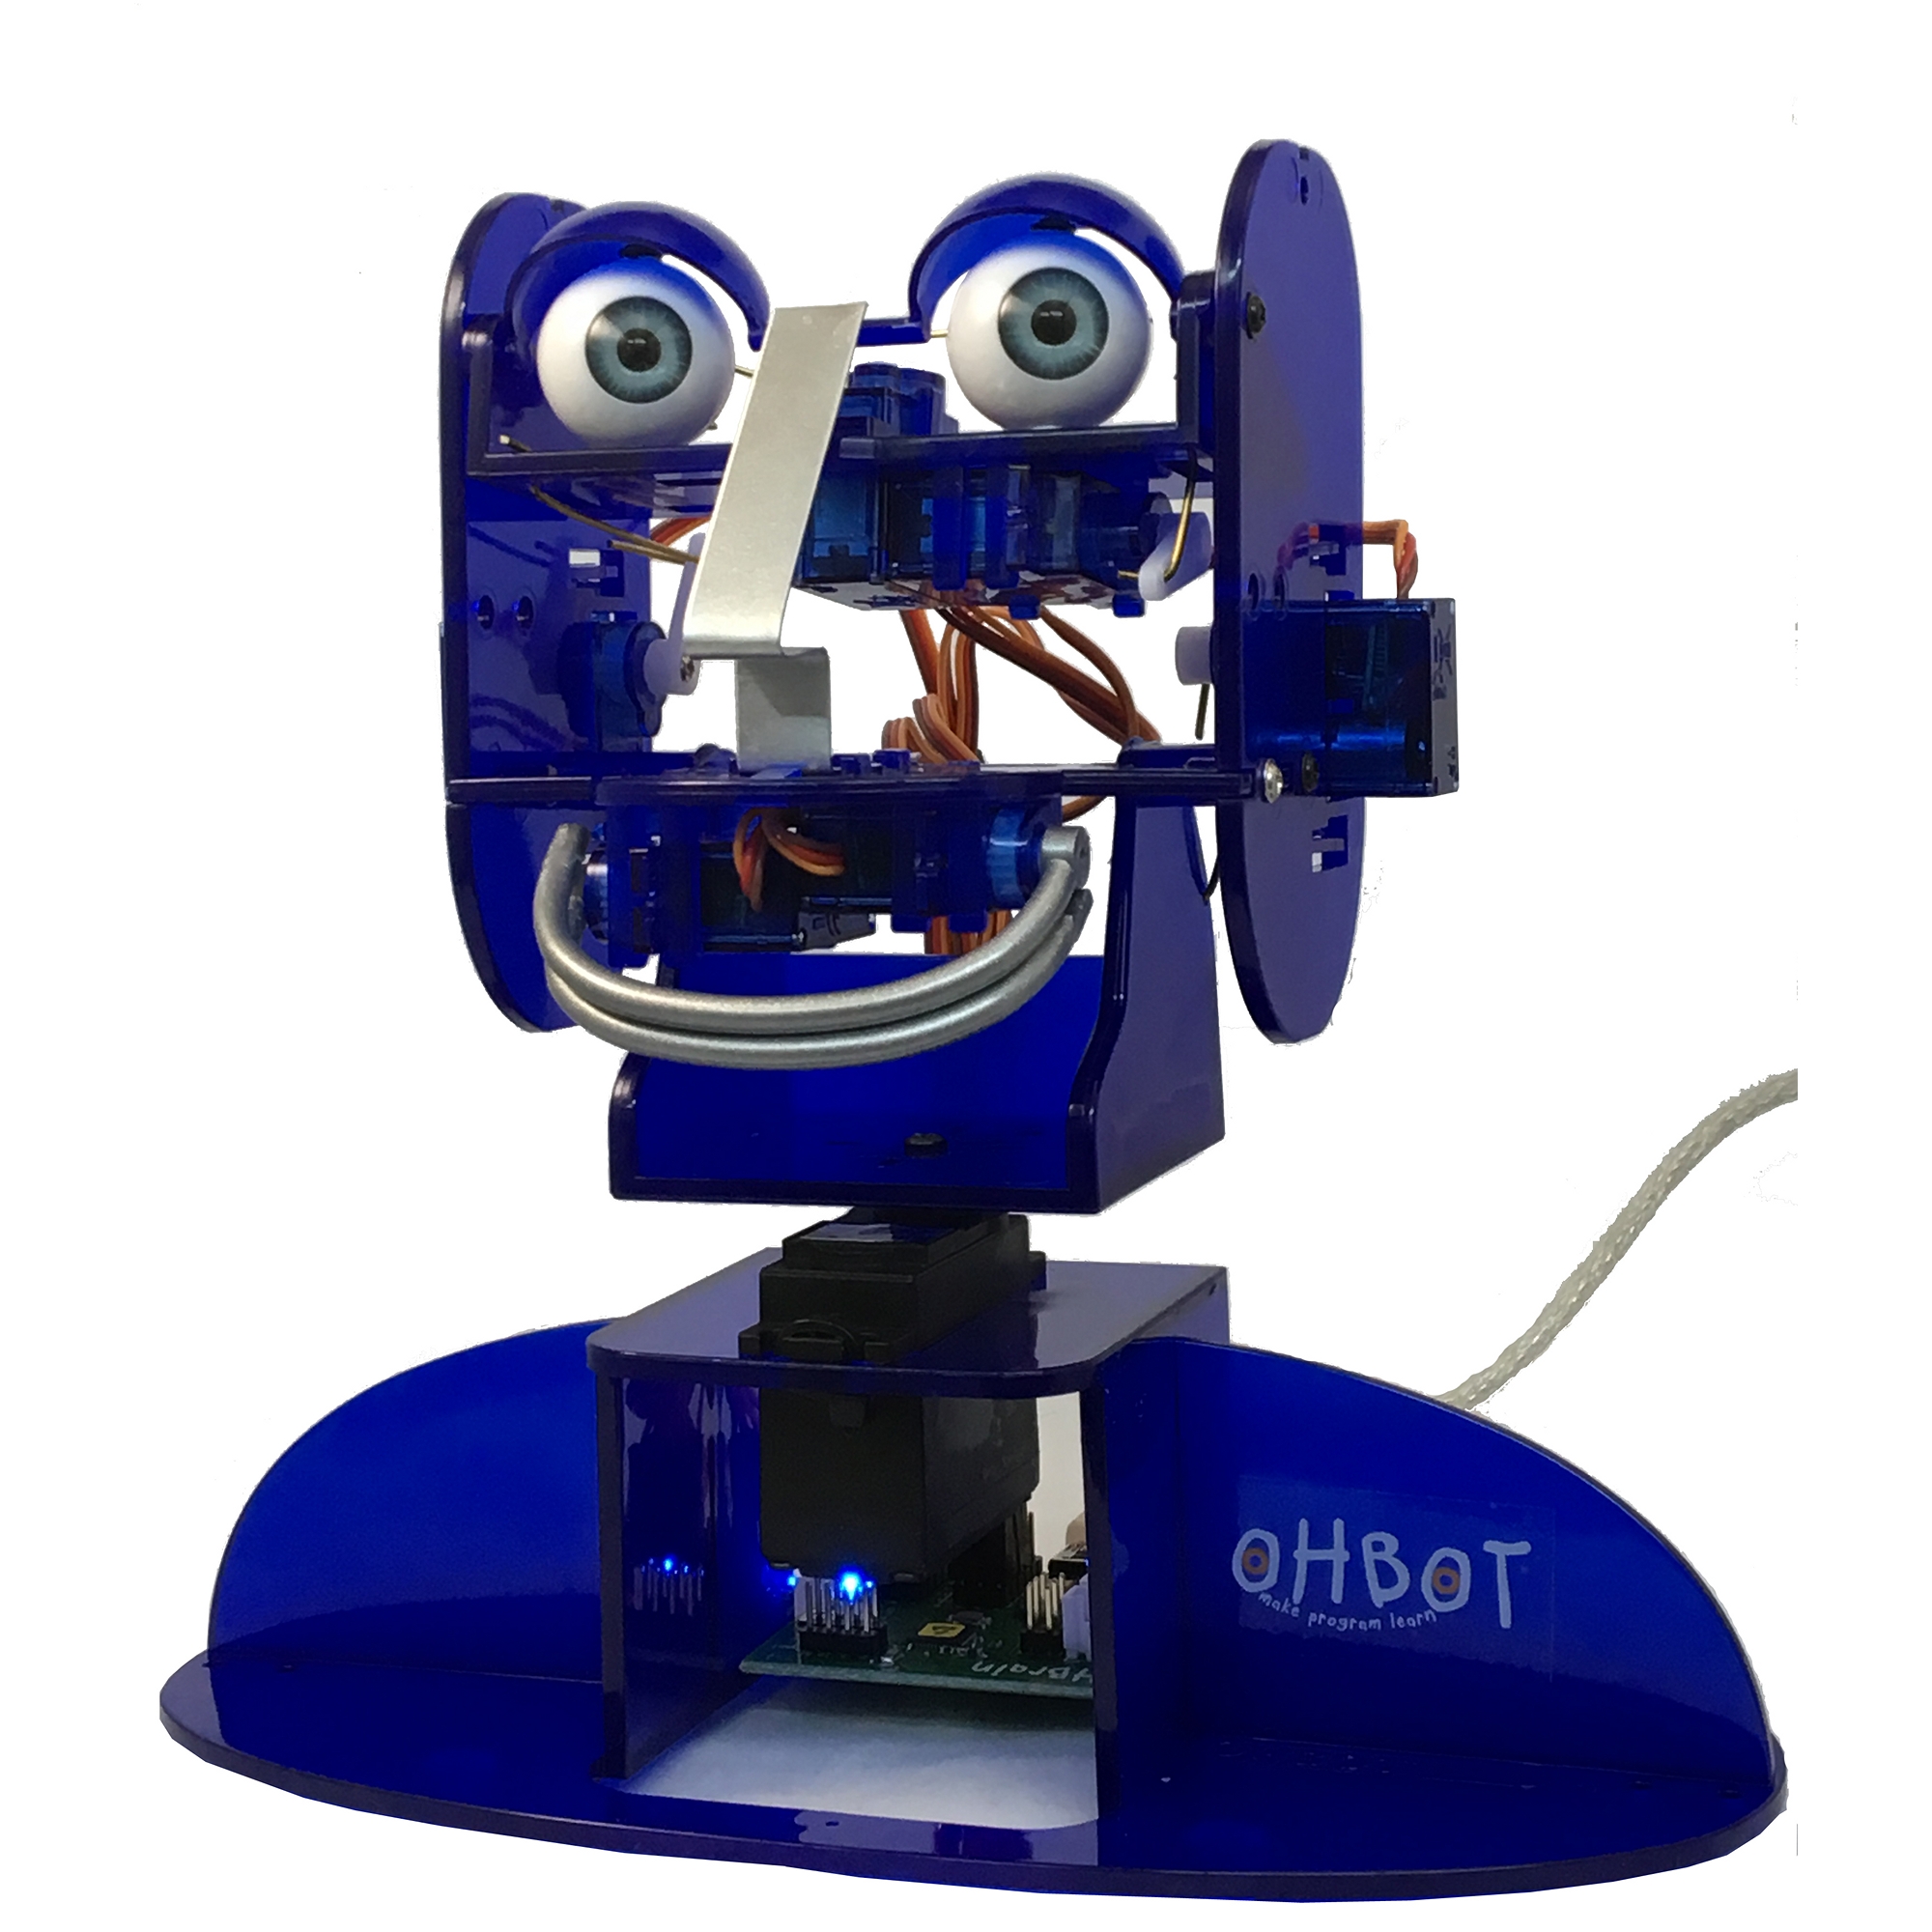 Ohbot 2.1 Educational Robot Assembled with 4 user software licence for Windows